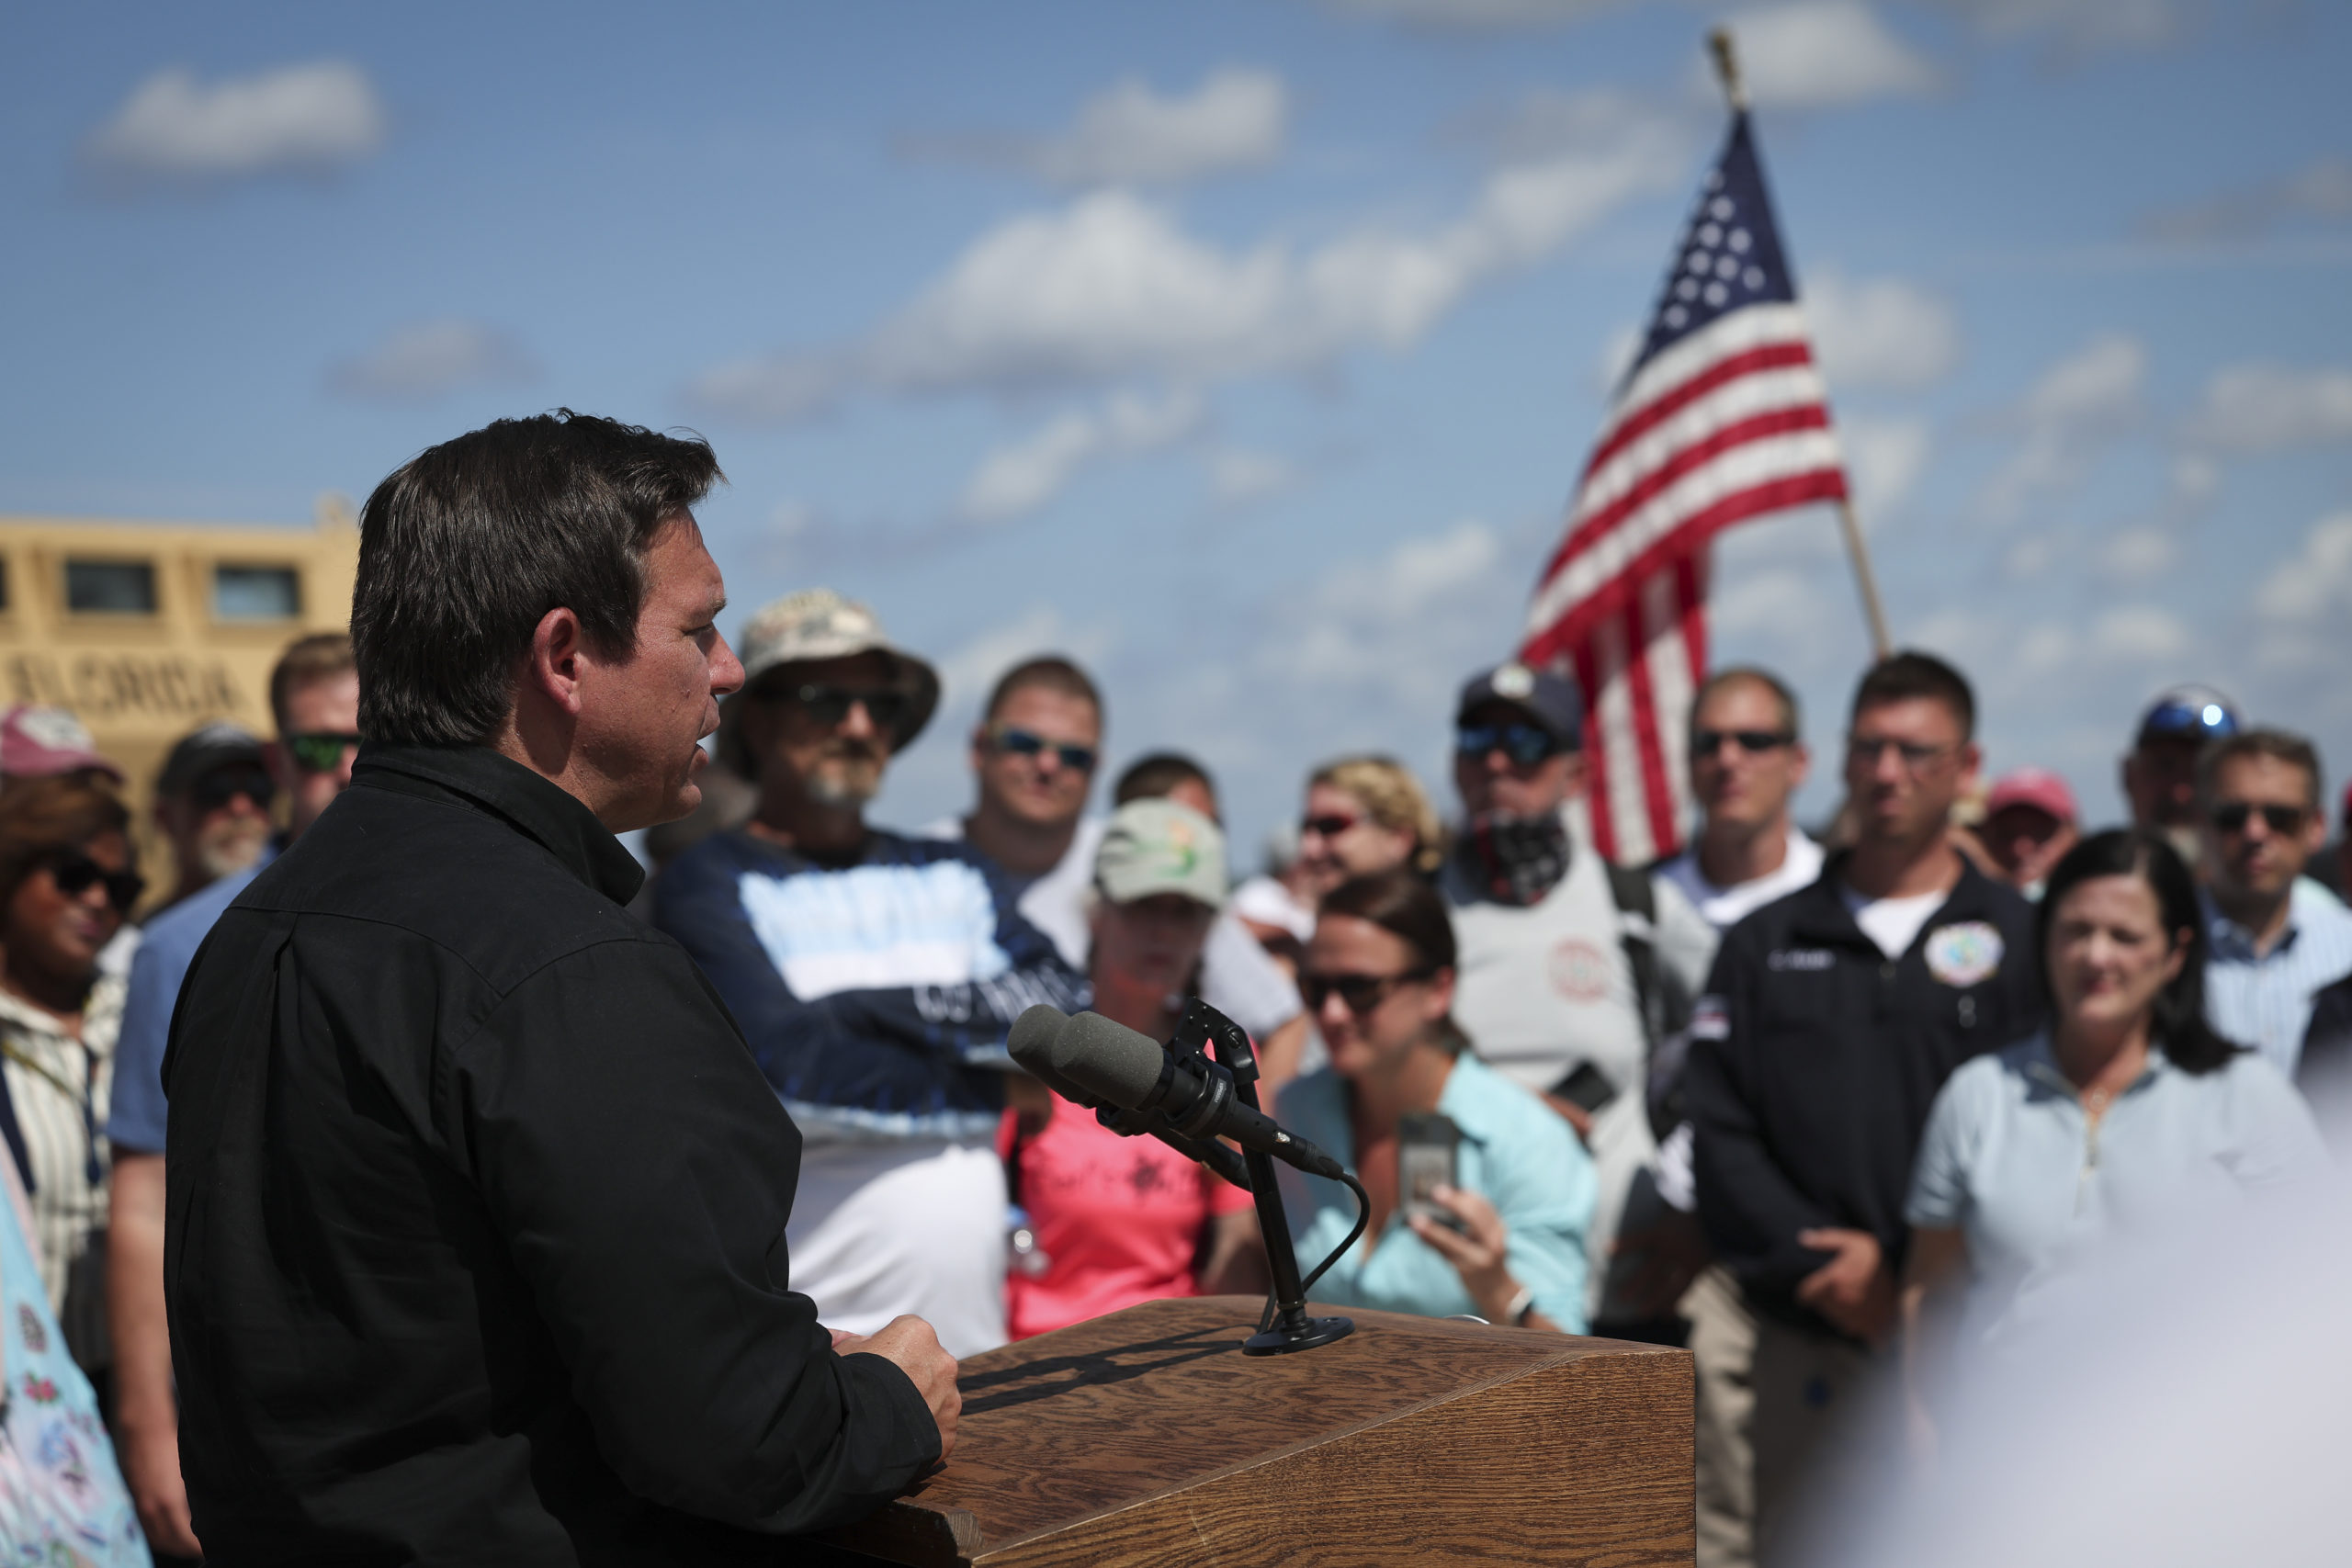 MATLACHA, FLORIDA - OCTOBER 05: Florida Gov. Ron DeSantis speaks during a press conference on the island of Matlacha on October 05, 2022 in Matlacha Florida. DeSantis delivered remarks about the completion of a temporary bridge to reconnect the island, and Pine Island as well, to the mainland. (Photo by Win McNamee/Getty Images)